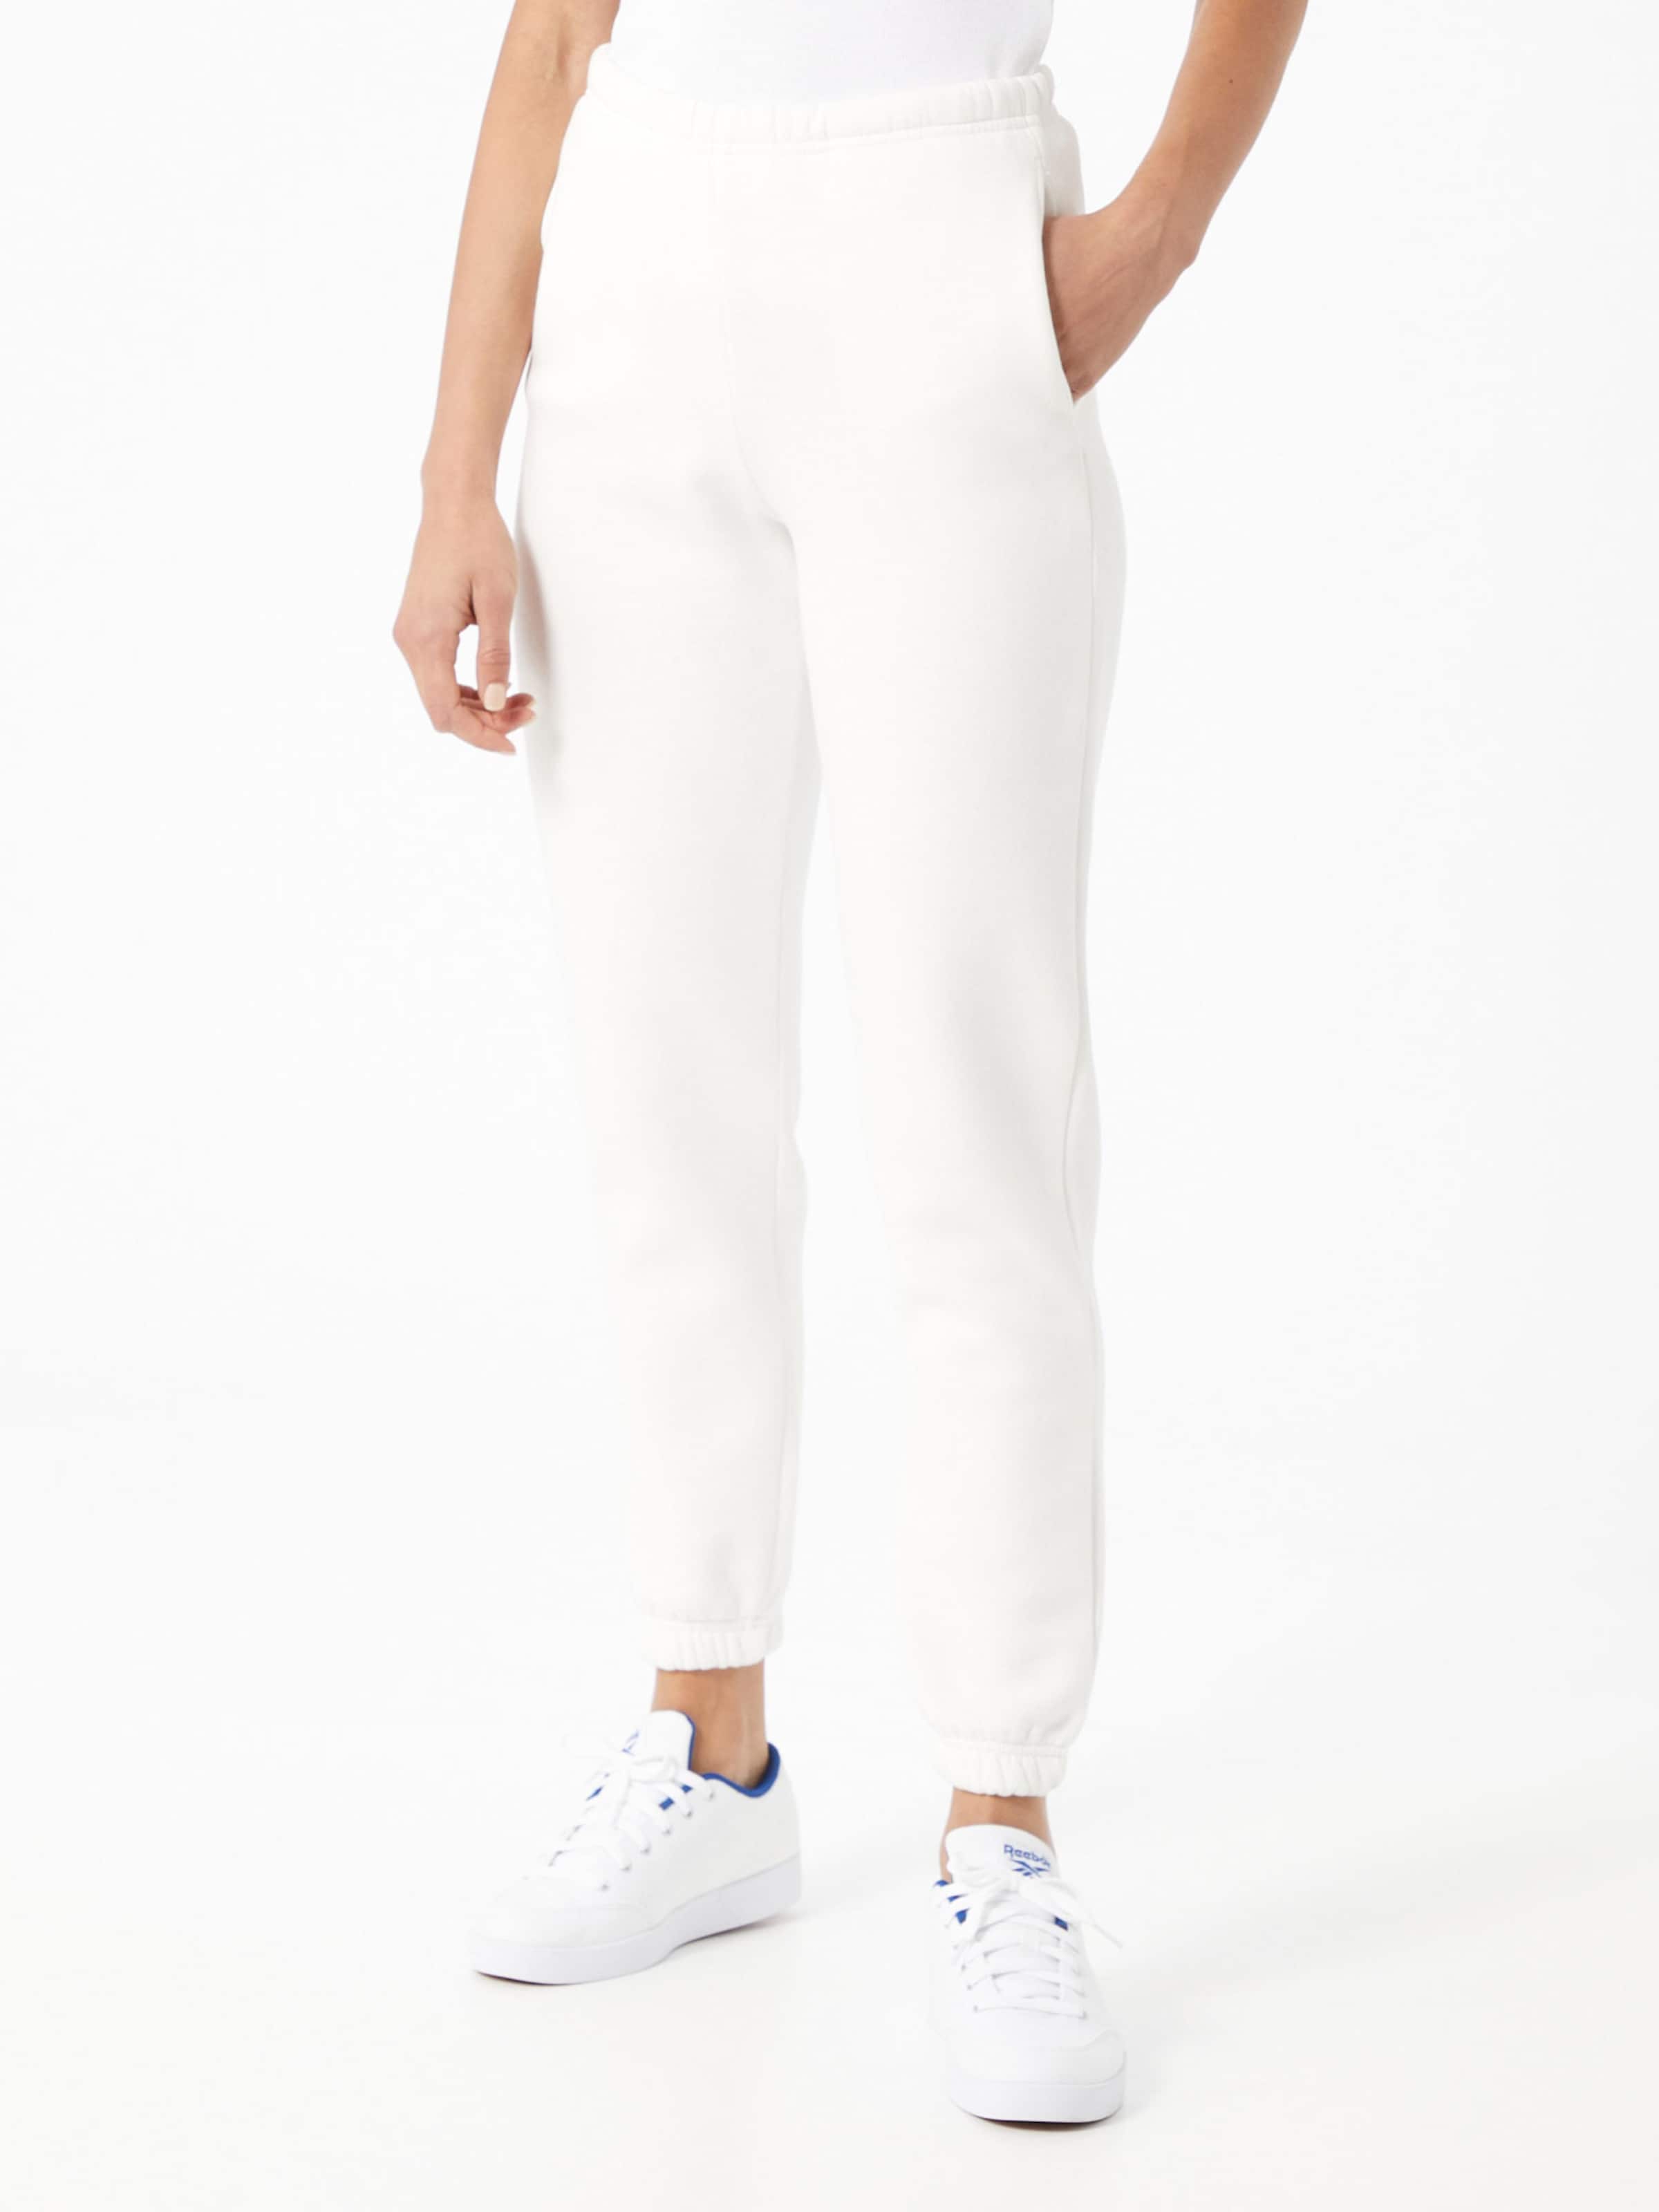 bYkYJ Donna Gina Tricot Pantaloni in Offwhite 